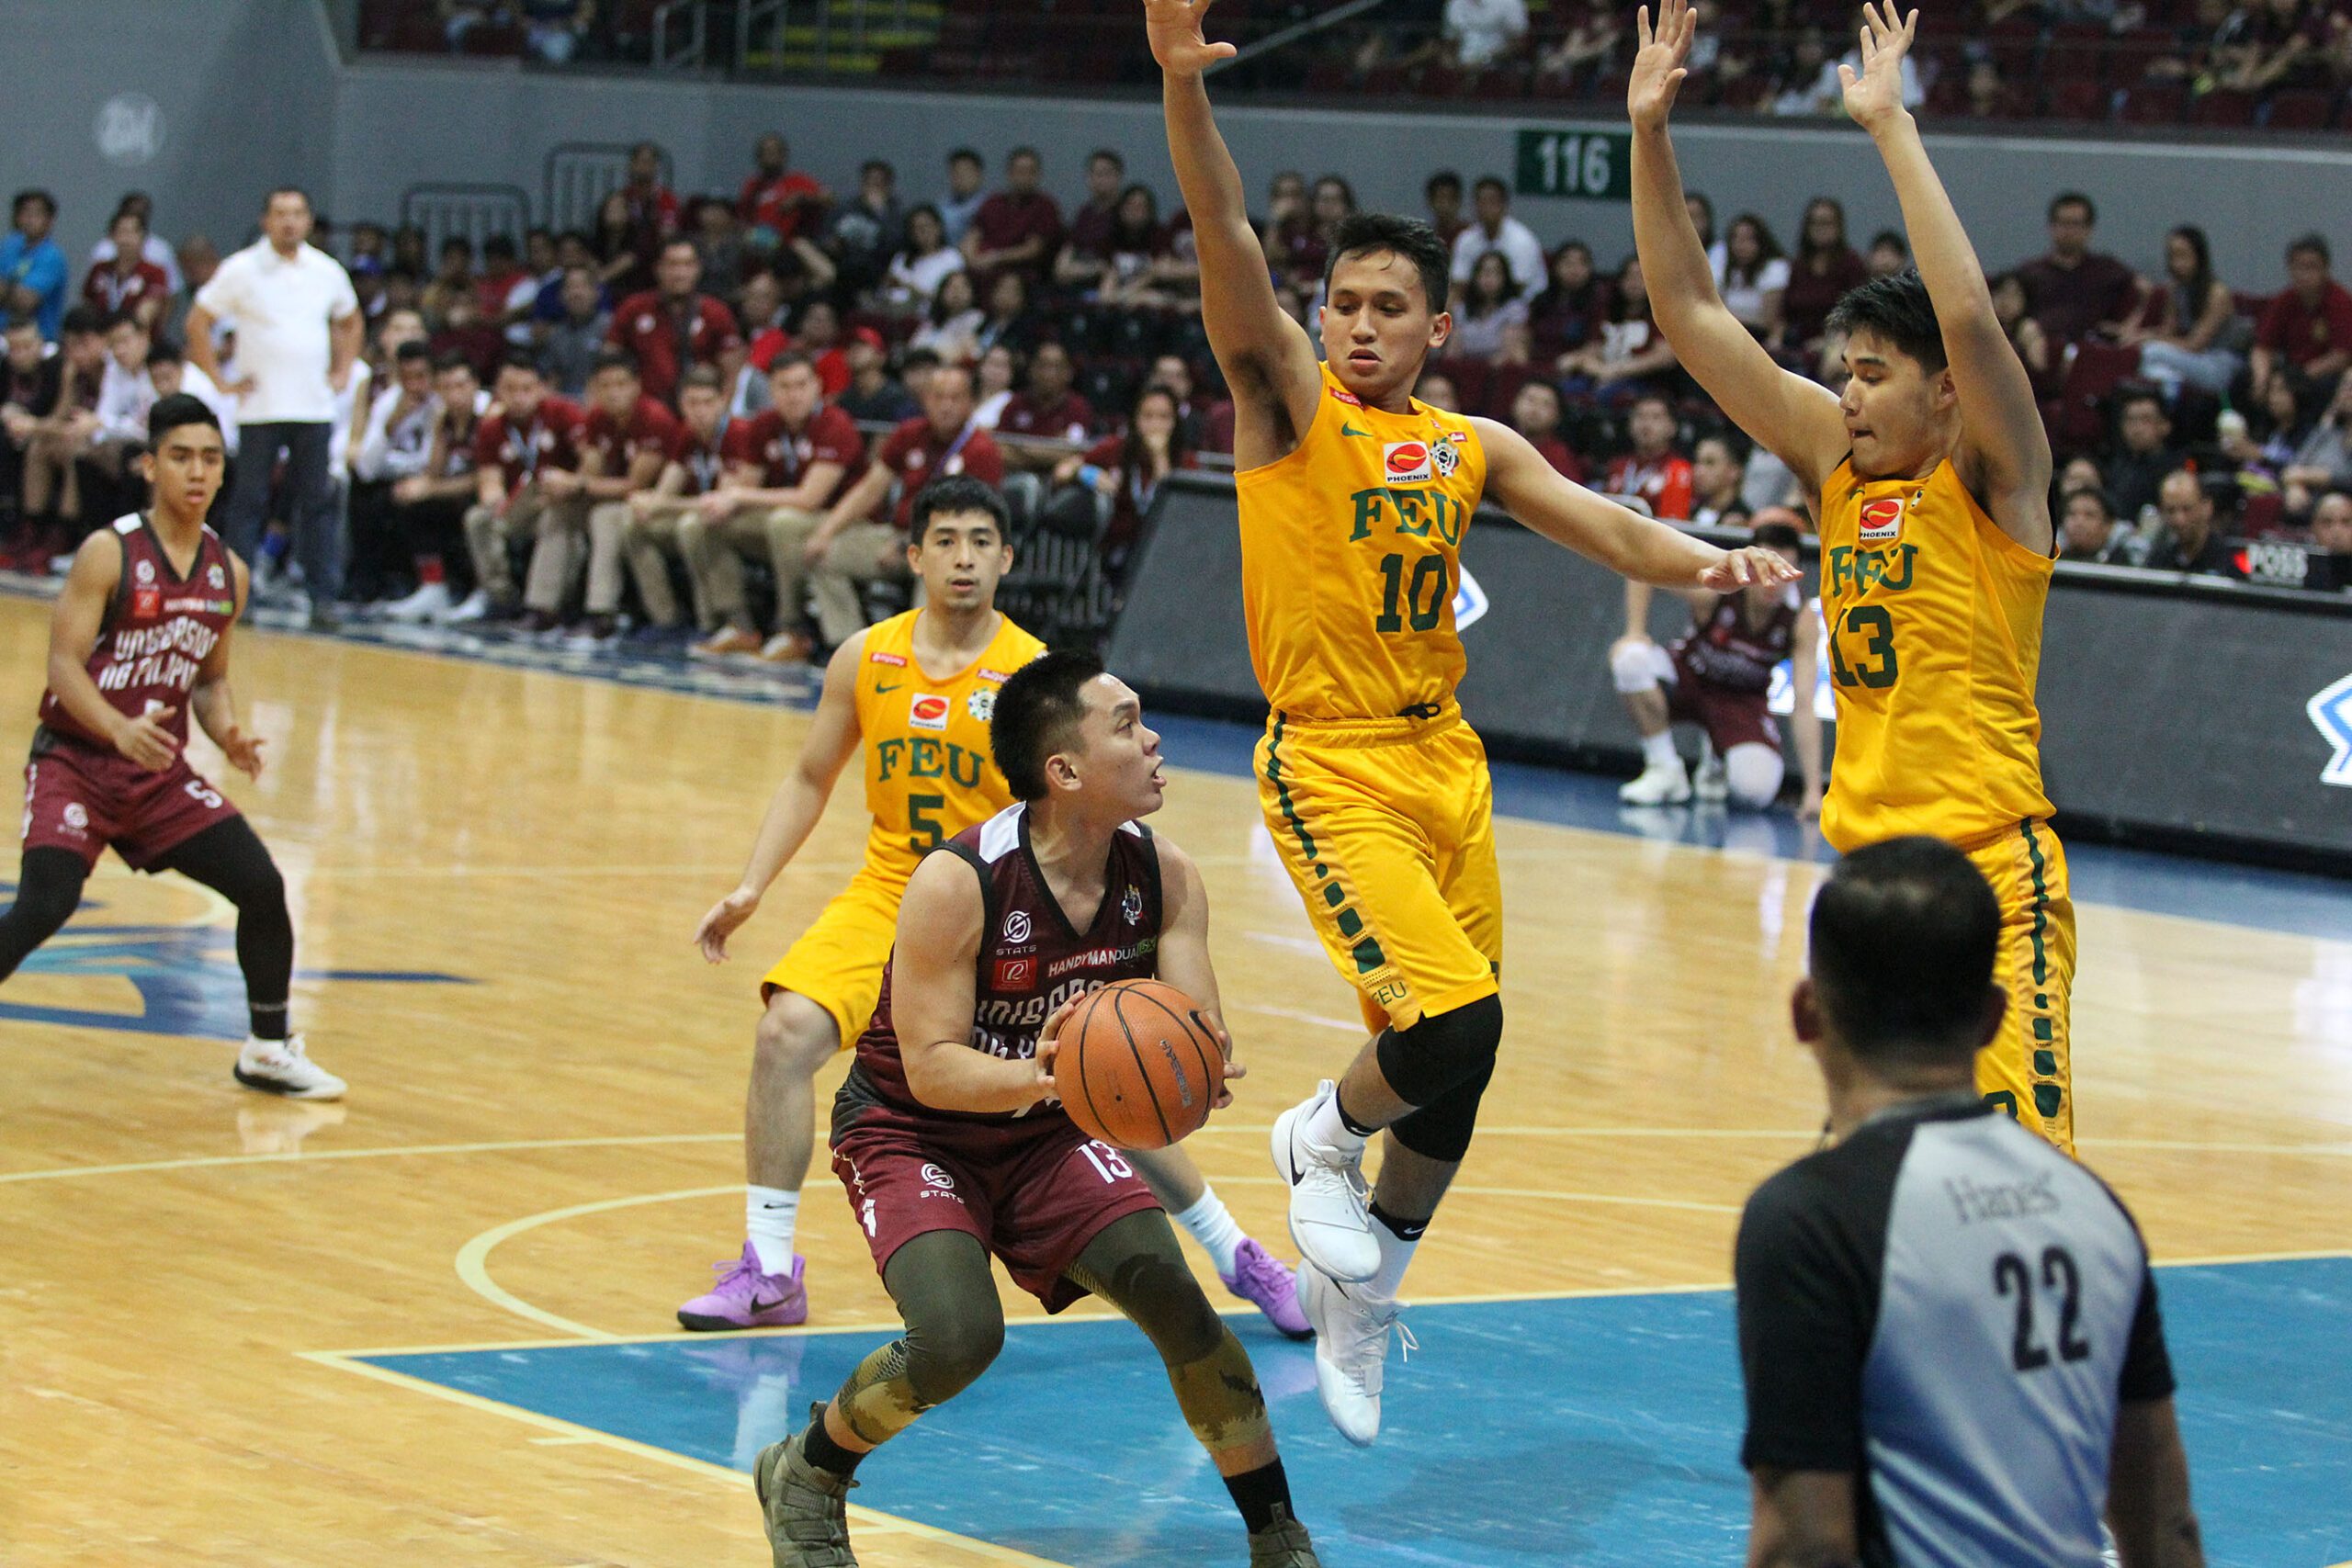 Desiderio’s game-winning triple keeps UP alive in thriller against FEU